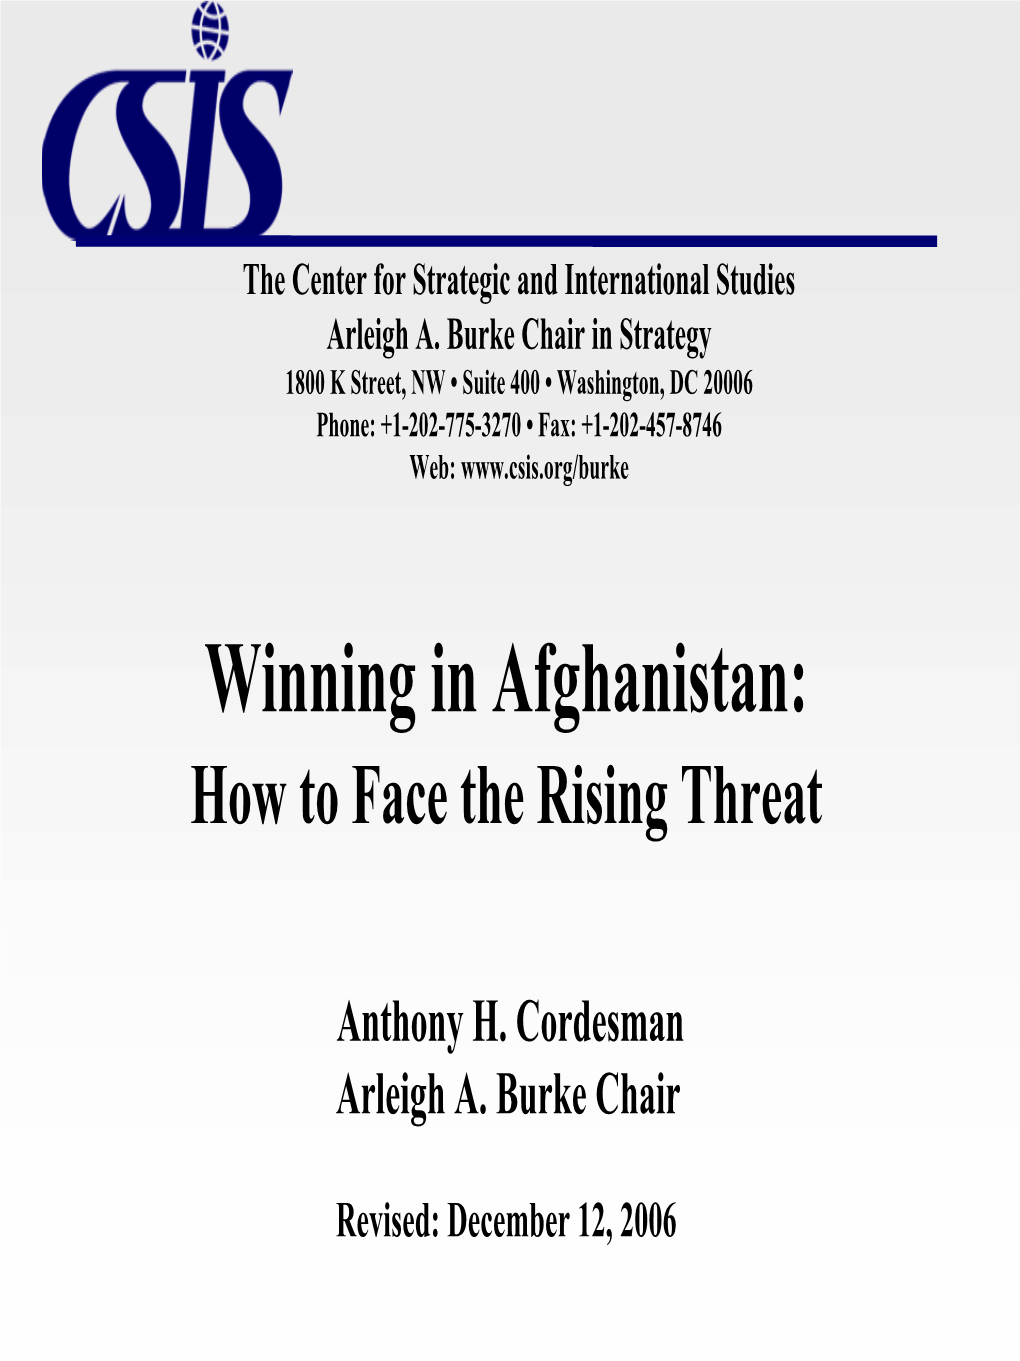 Winning in Afghanistan: How to Face the Rising Threat